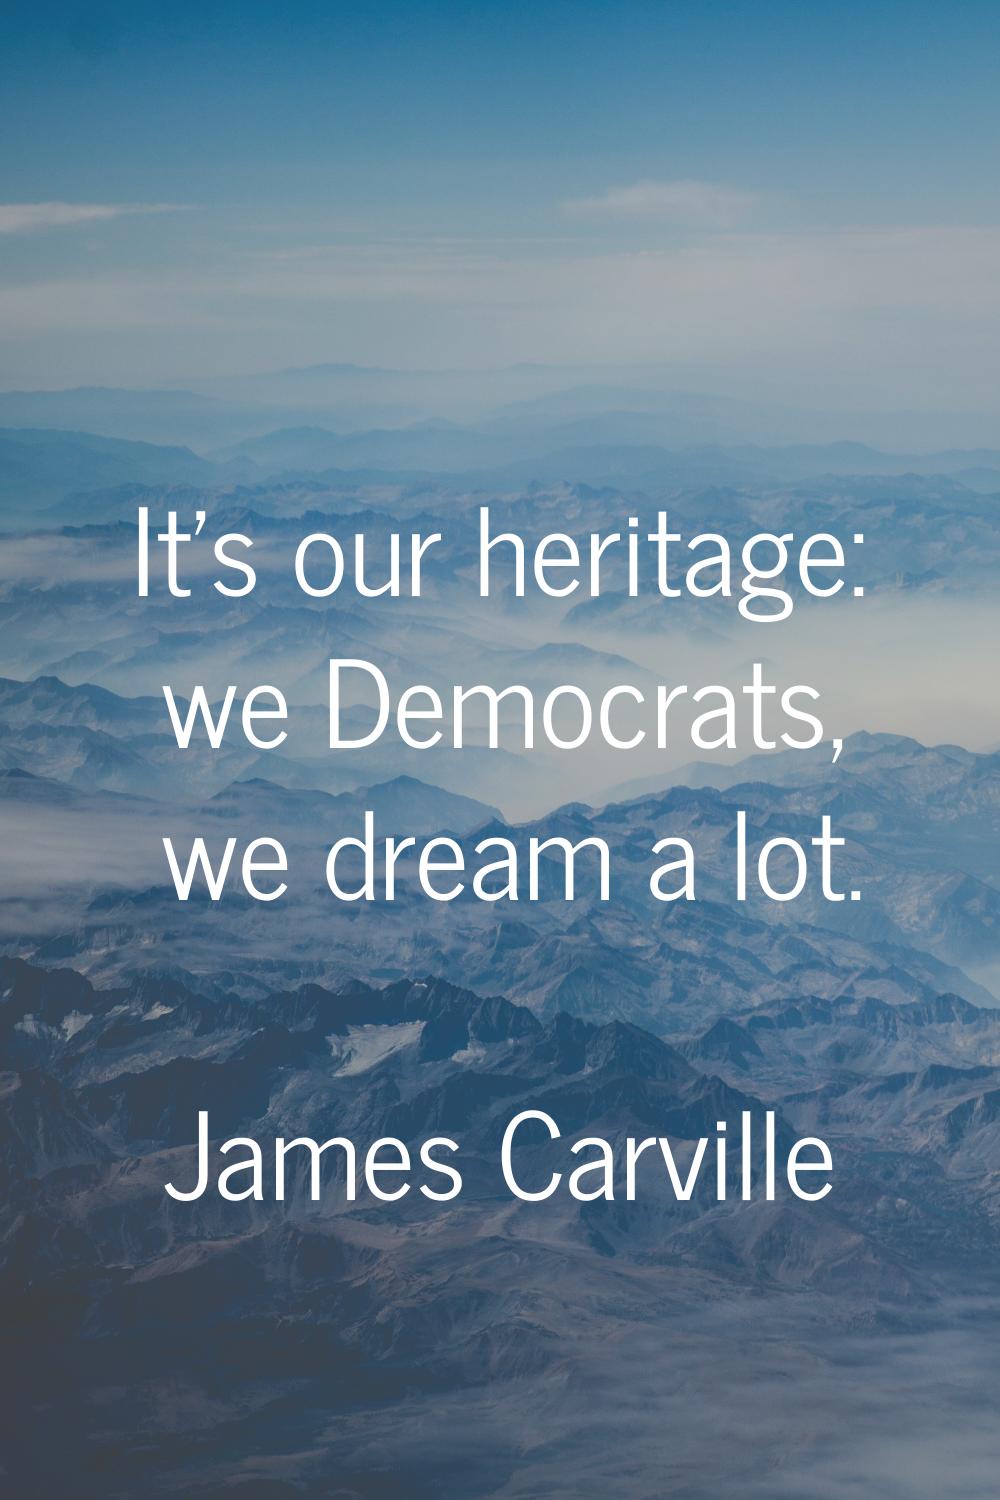 It's our heritage: we Democrats, we dream a lot.